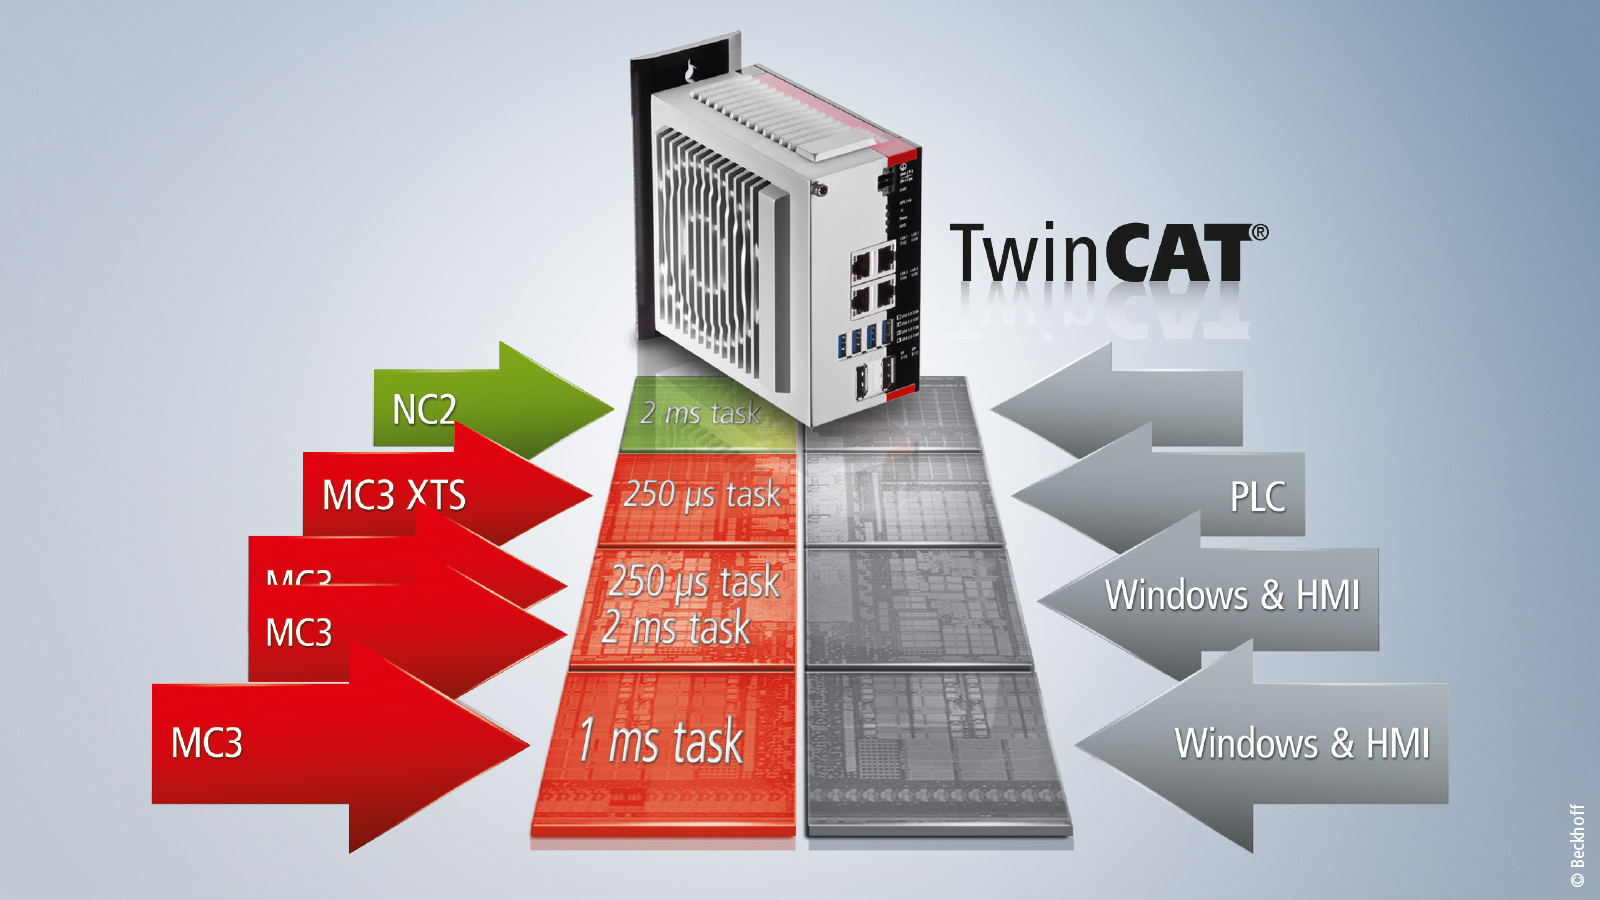 With TwinCAT MC3, the potential number of axes and application complexity scales in alignment with the TwinCAT platform level.